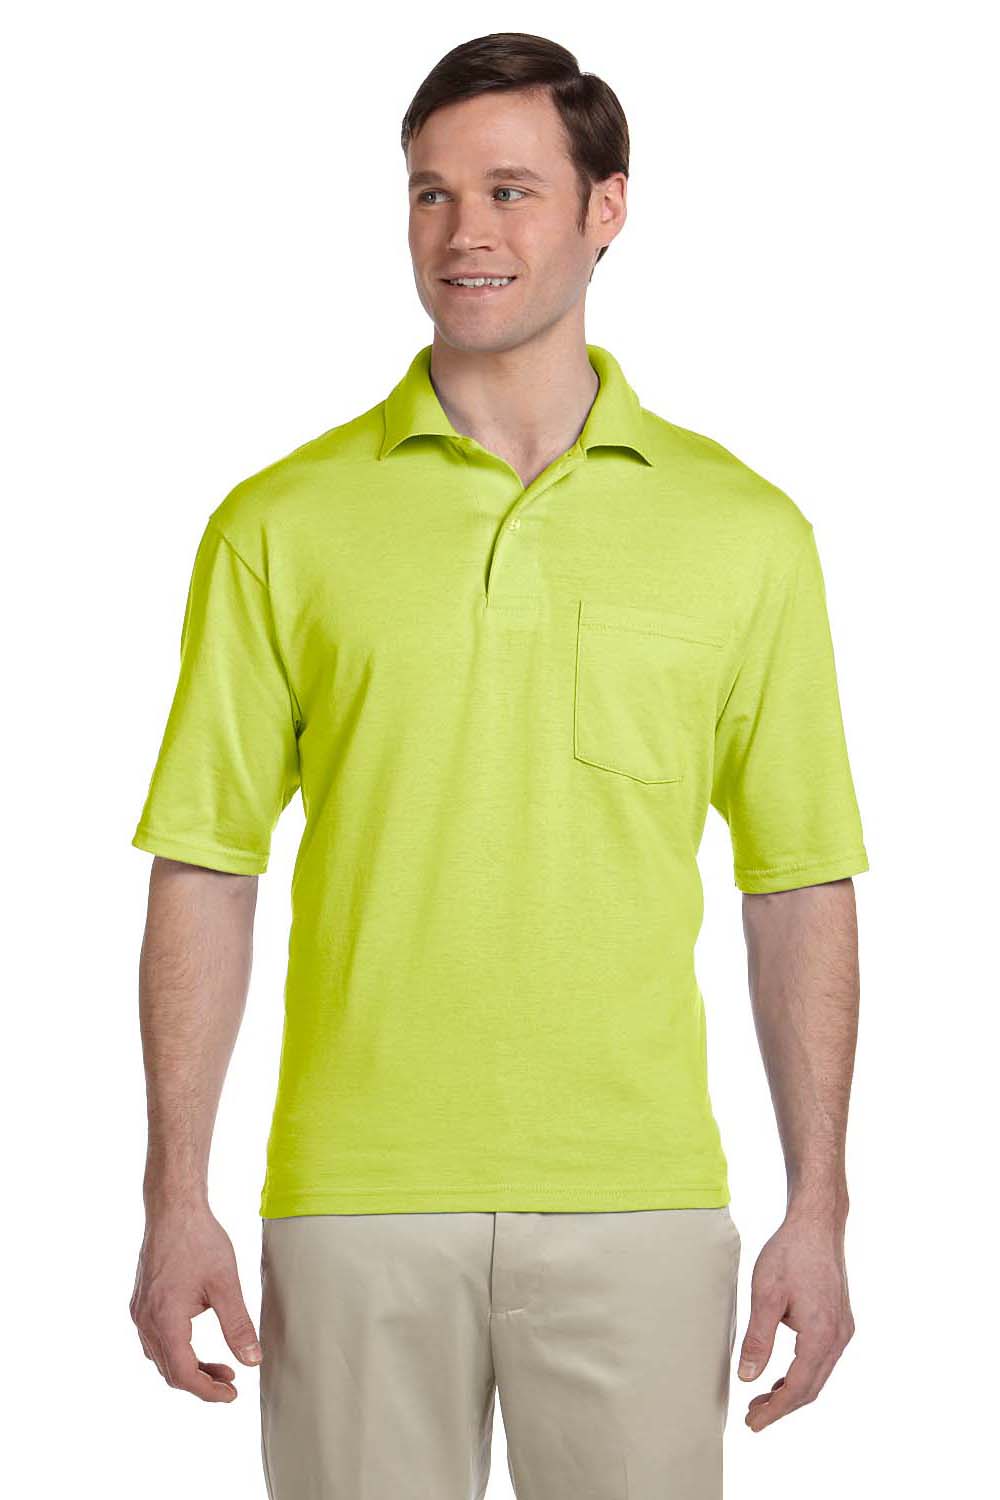 Jerzees 436P Mens SpotShield Stain Resistant Short Sleeve Polo Shirt w/ Pocket Safety Green Front